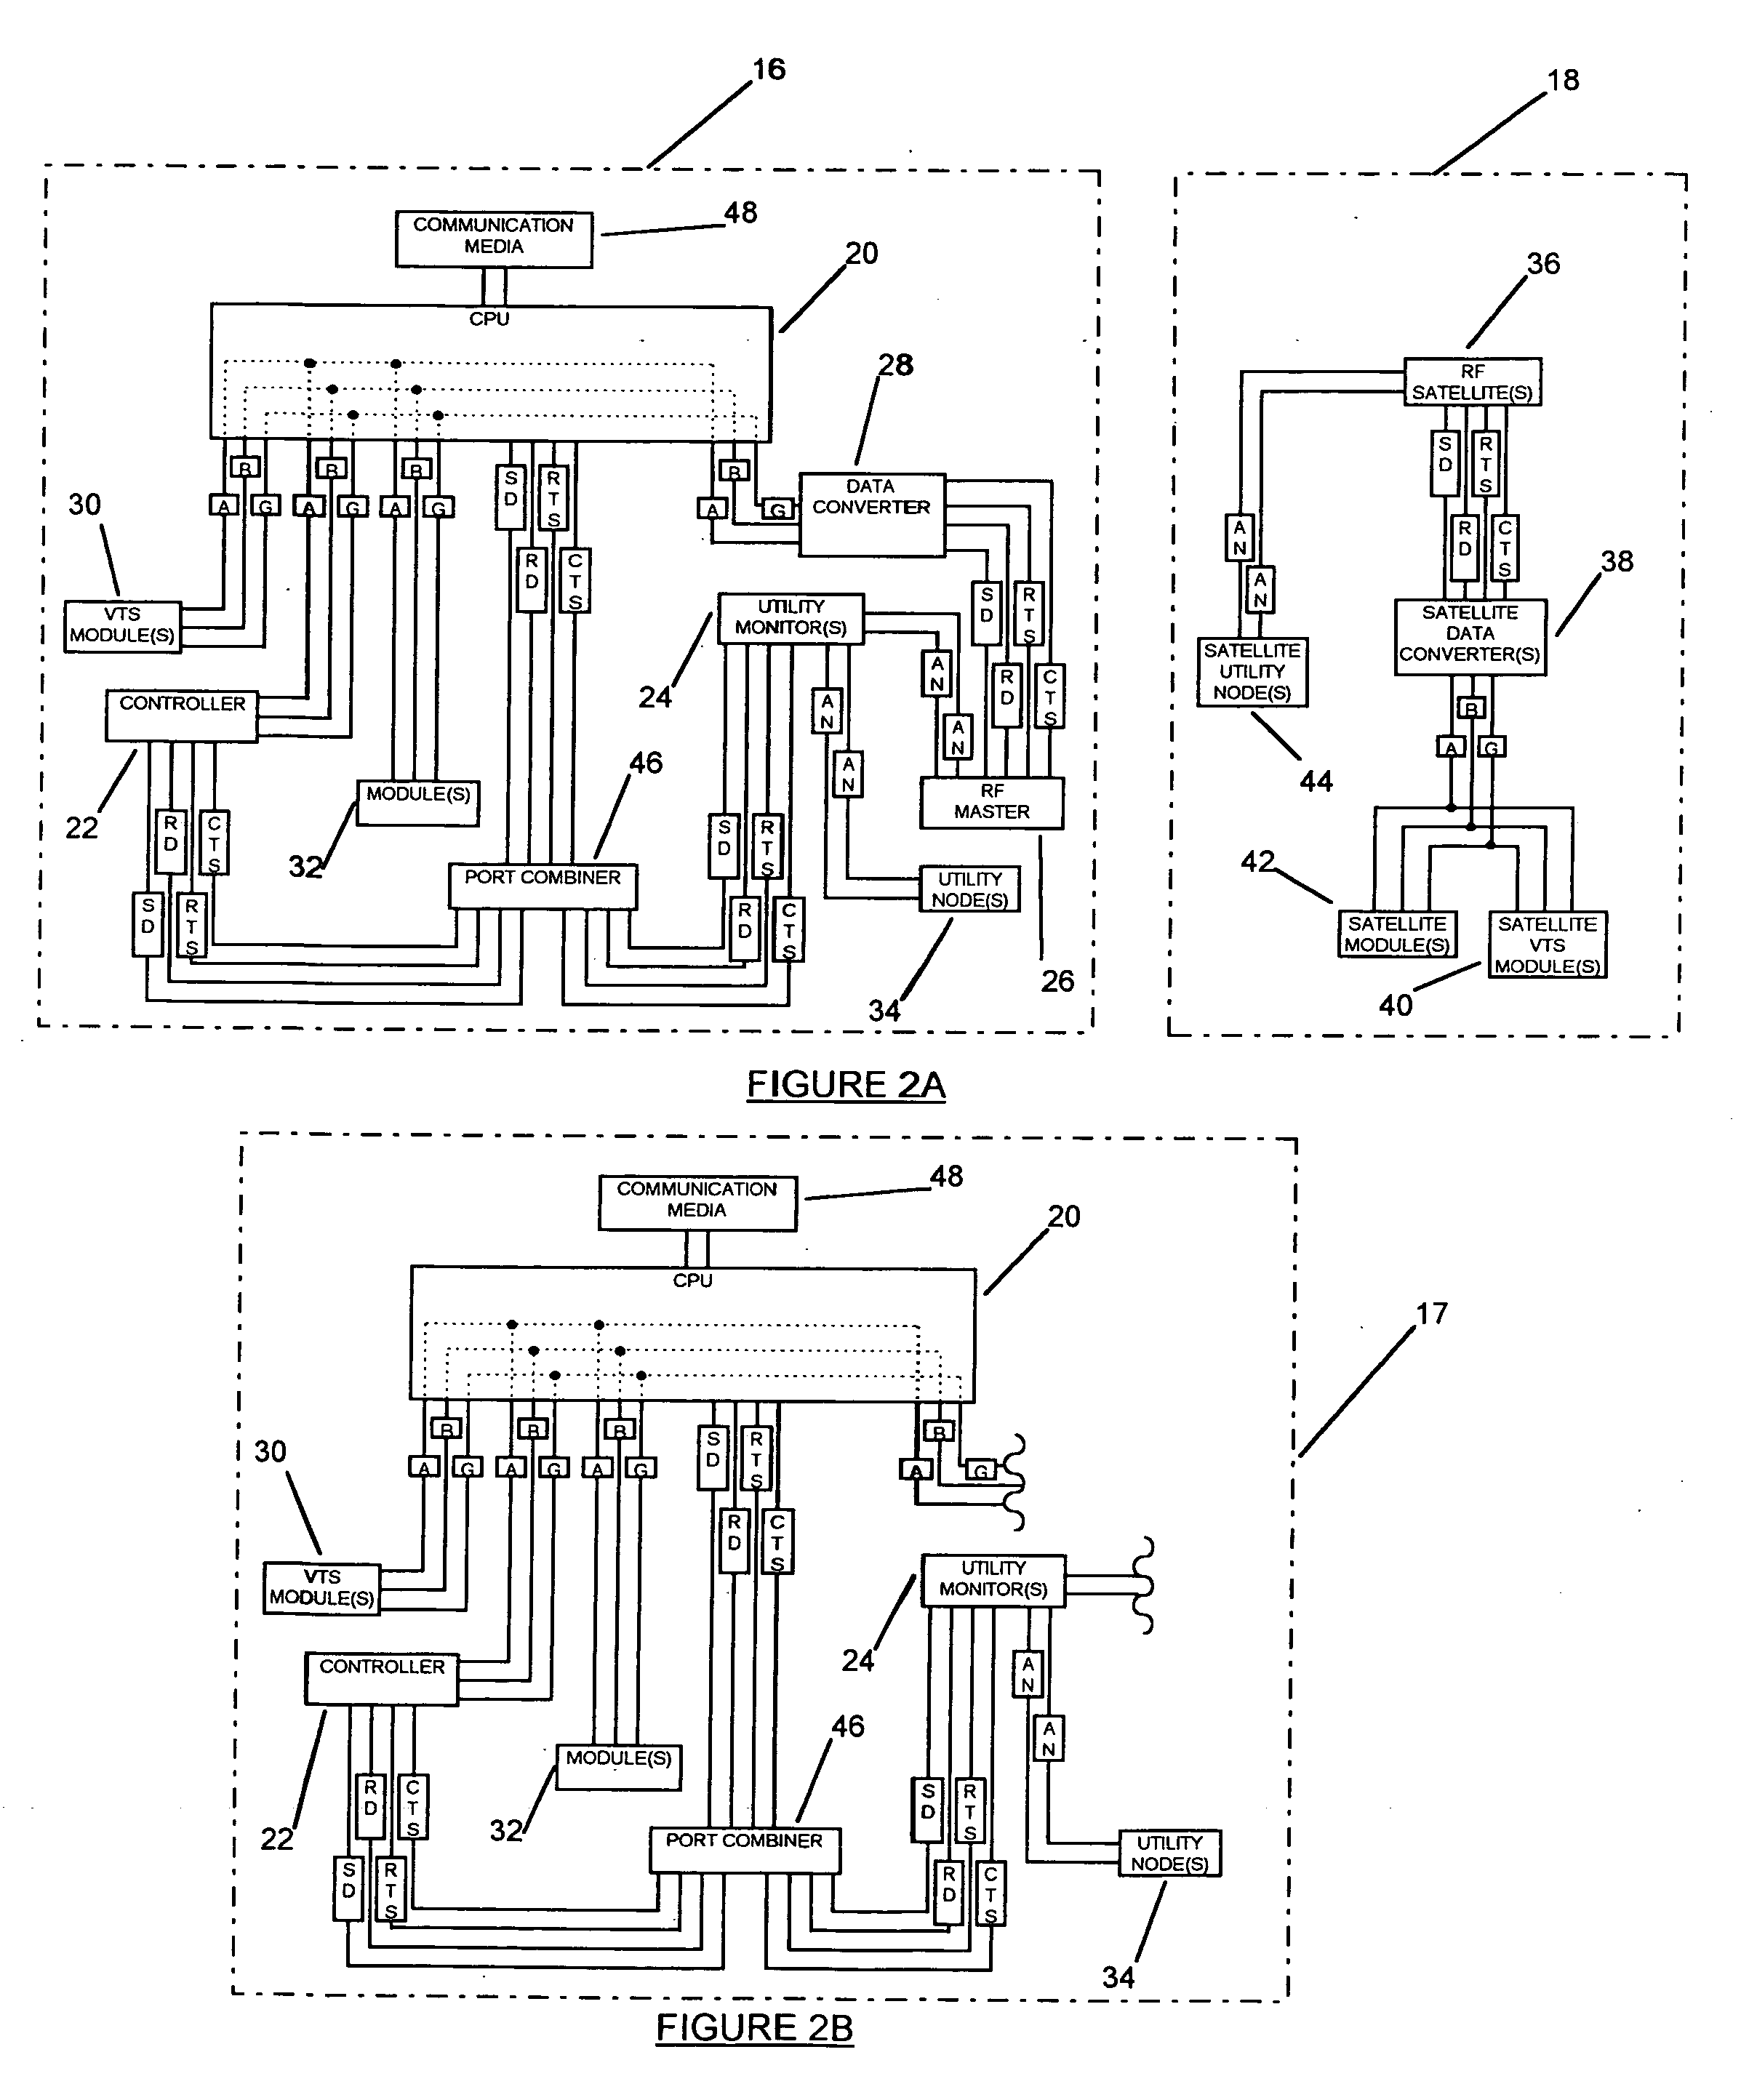 Integrated building control and information system with wireless networking